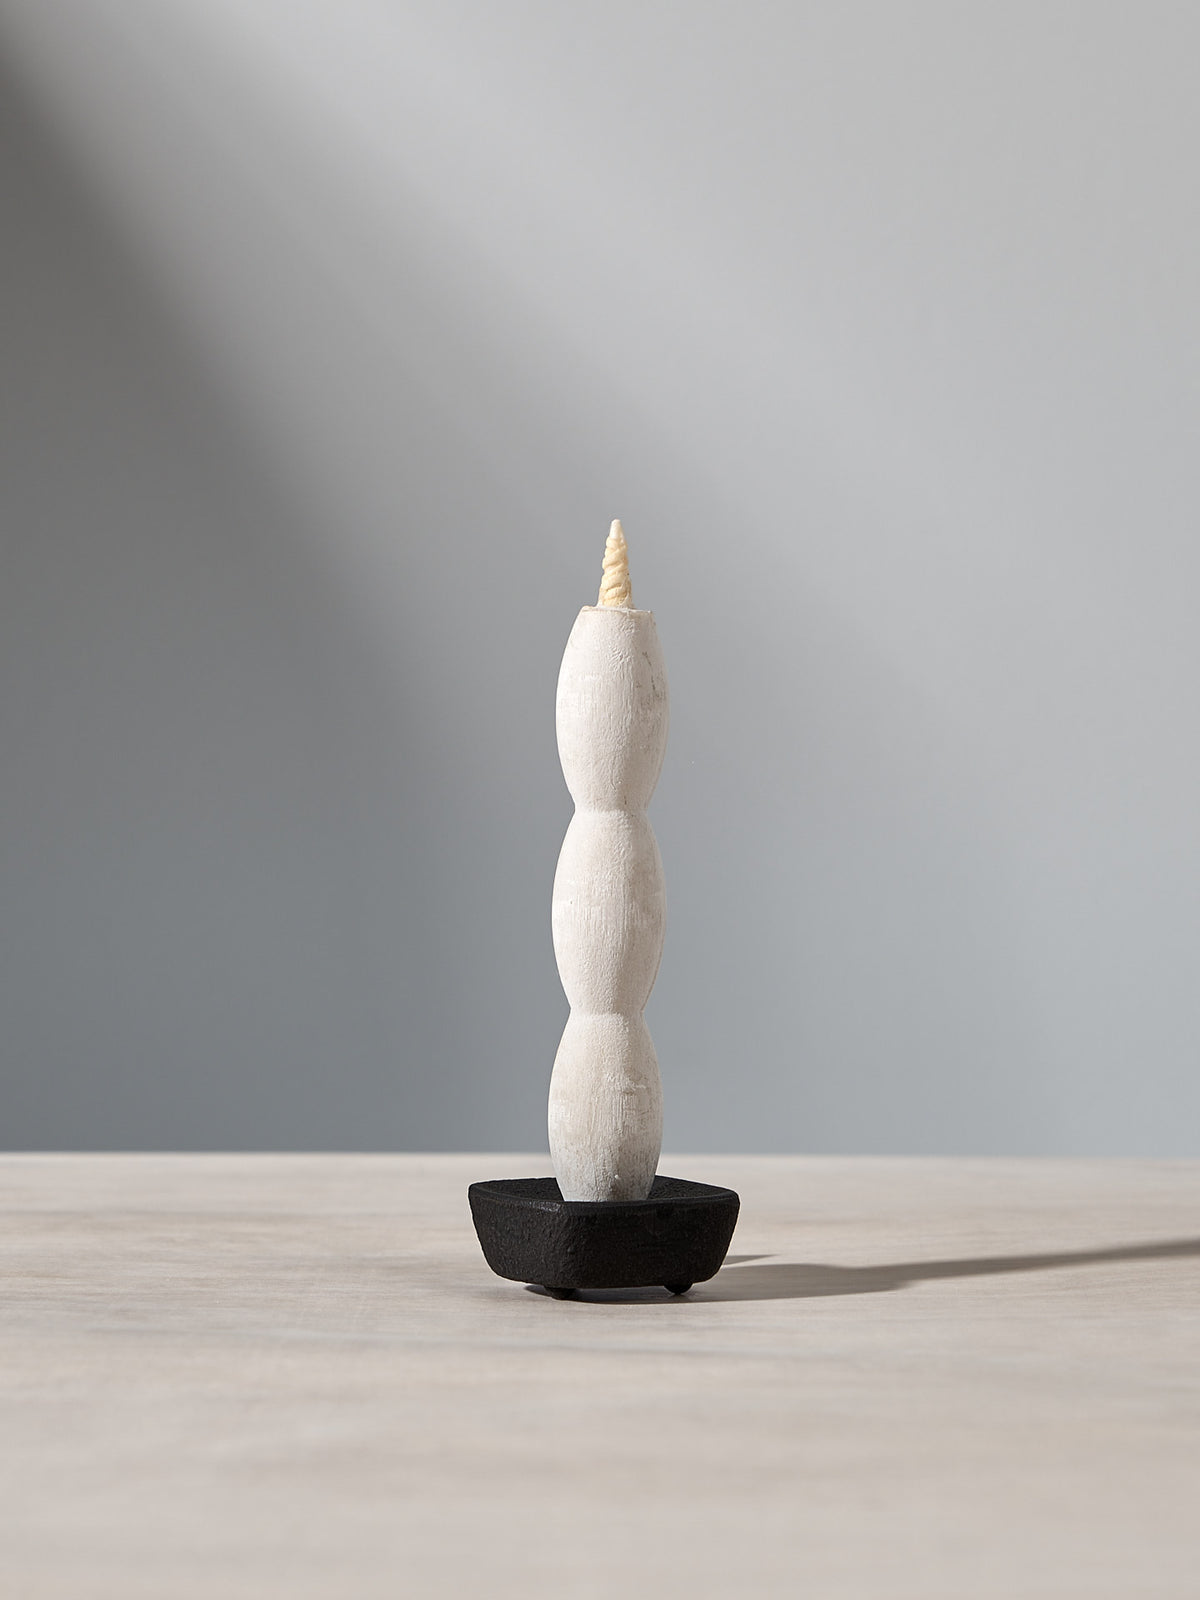 A NANAO – 5 Piece Mixed Box Set candle sitting on top of a wooden table, manufactured by Takazawa.